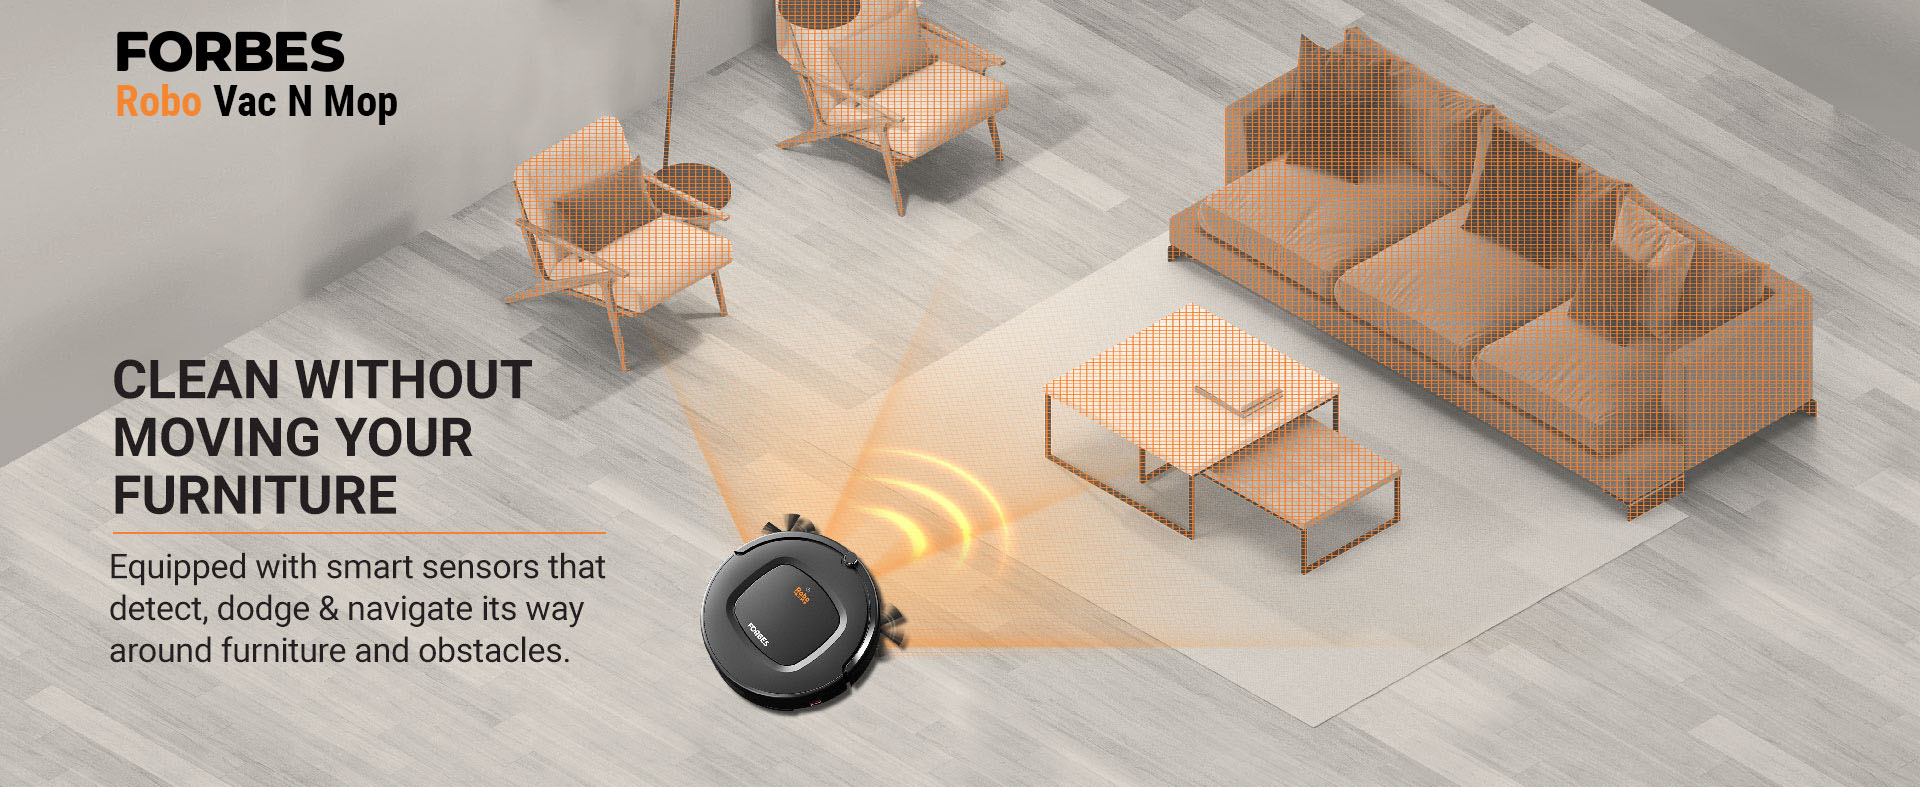 Equipped with smart sensors that detect, dodge & navigate its way around furniture and obstacles.